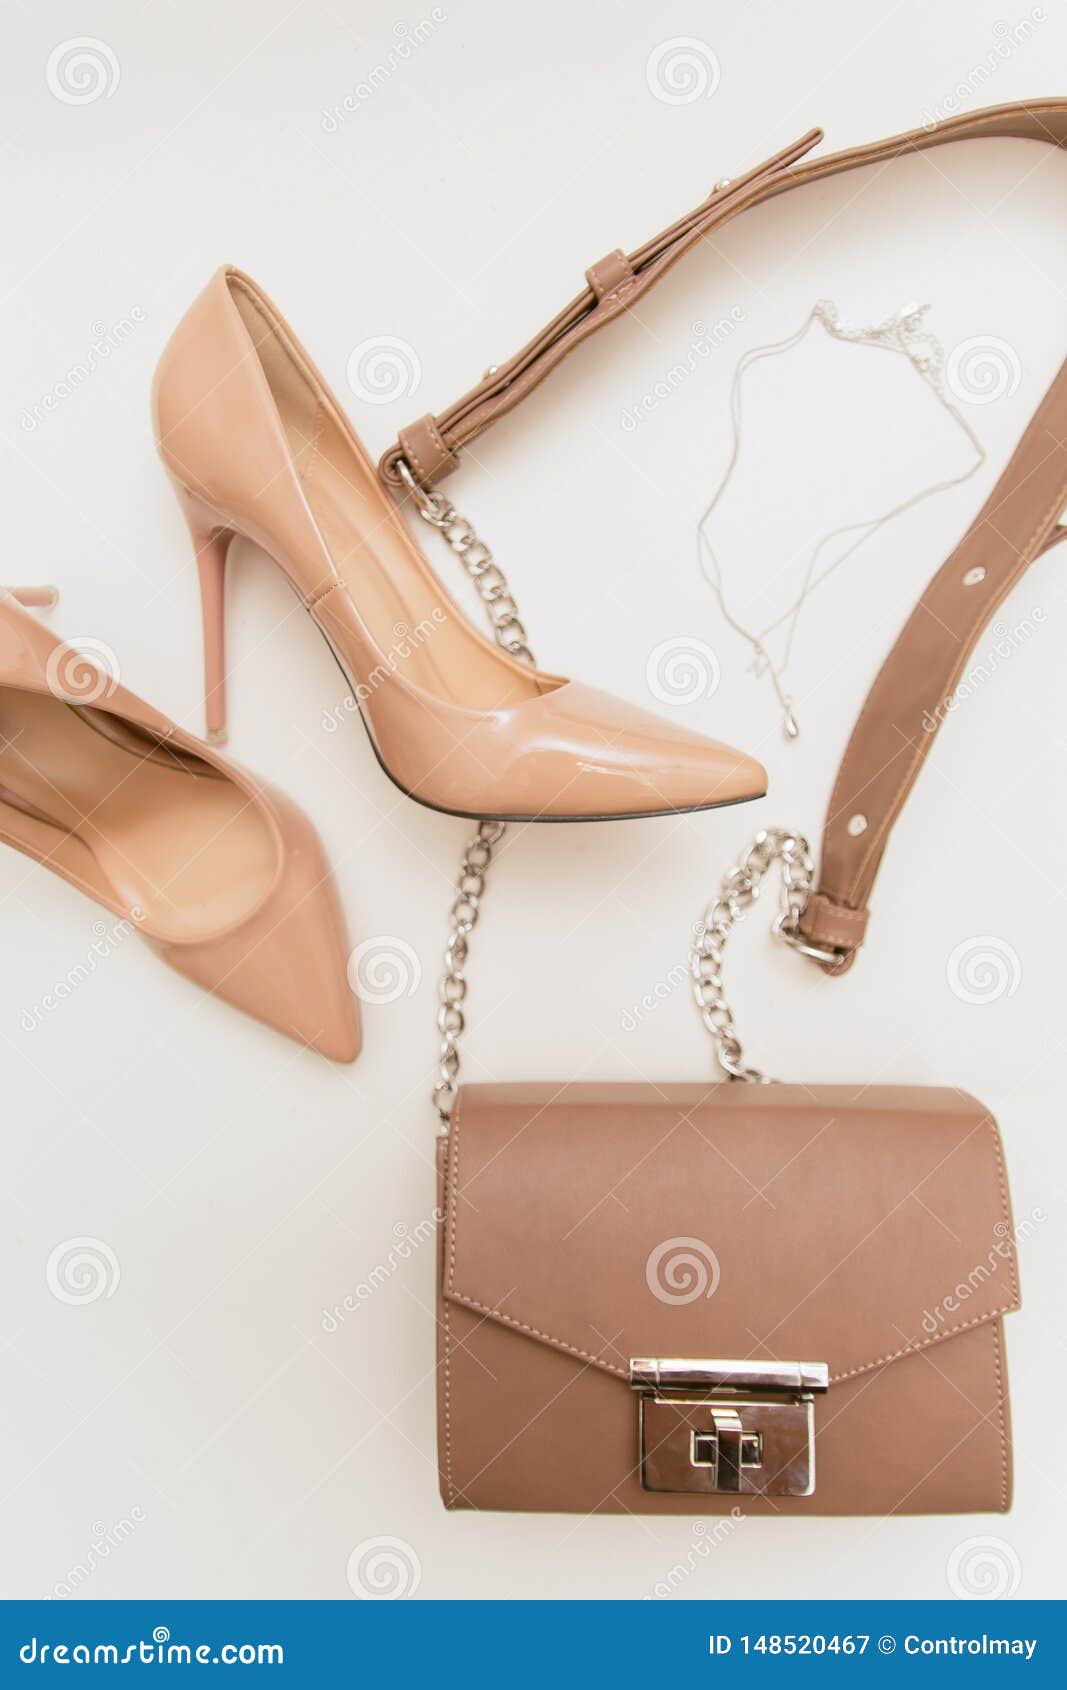 shoes and bag